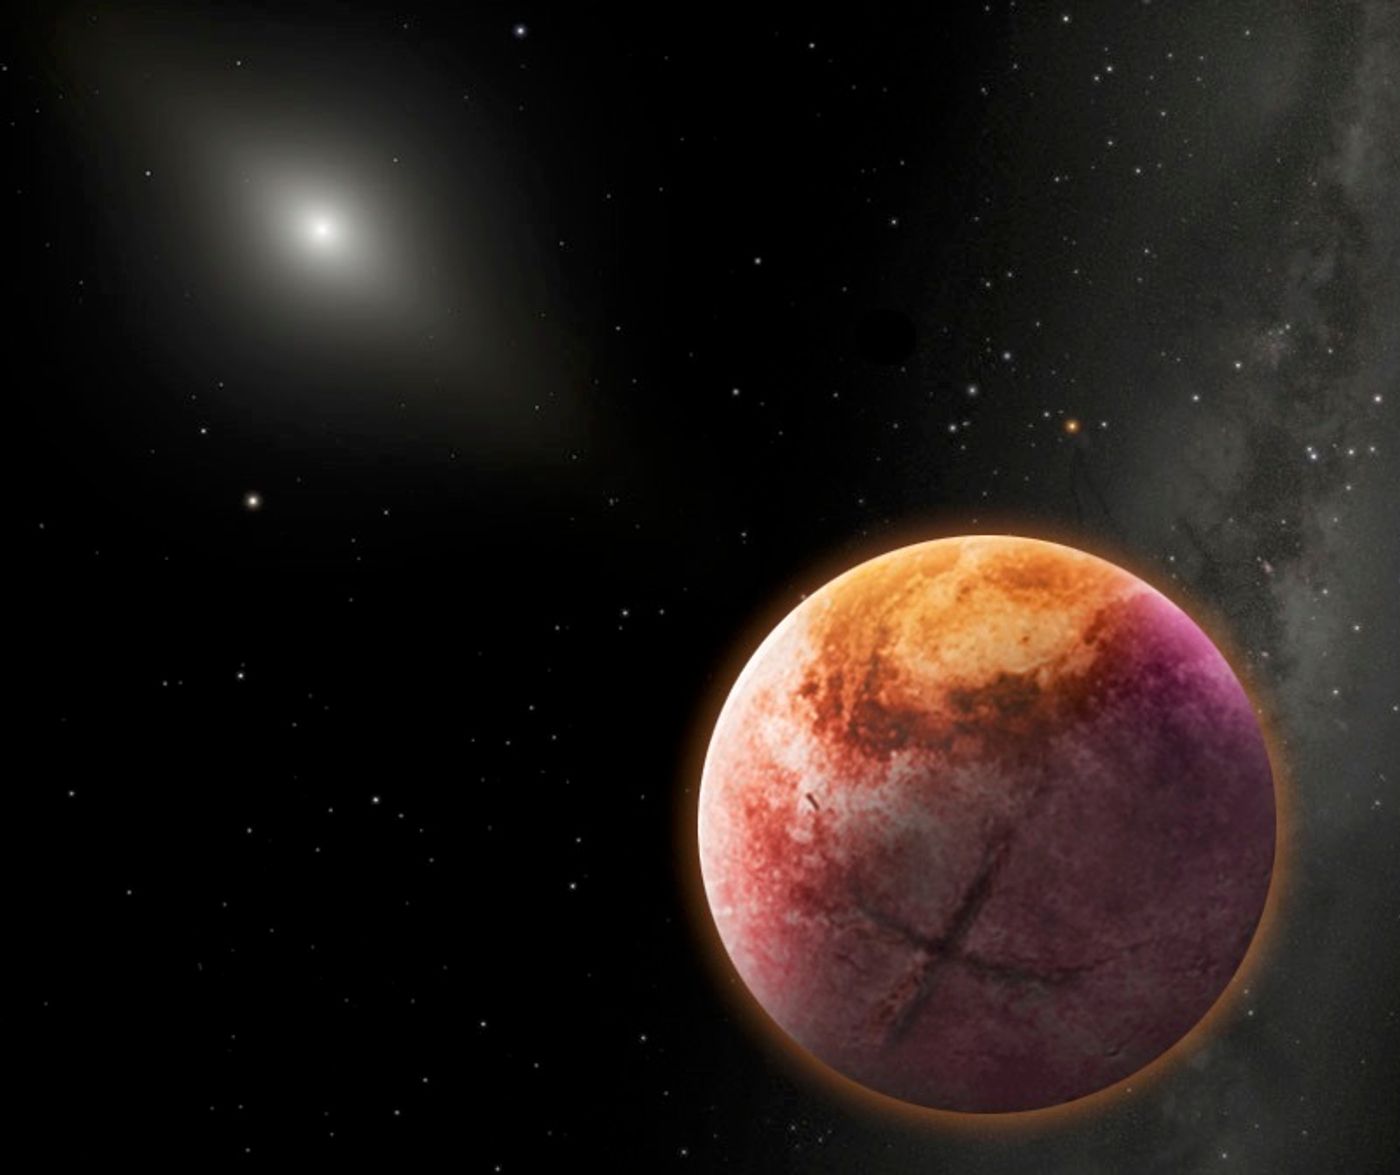 An artist's impression of a theoretical distant planet dubbed Planet X.